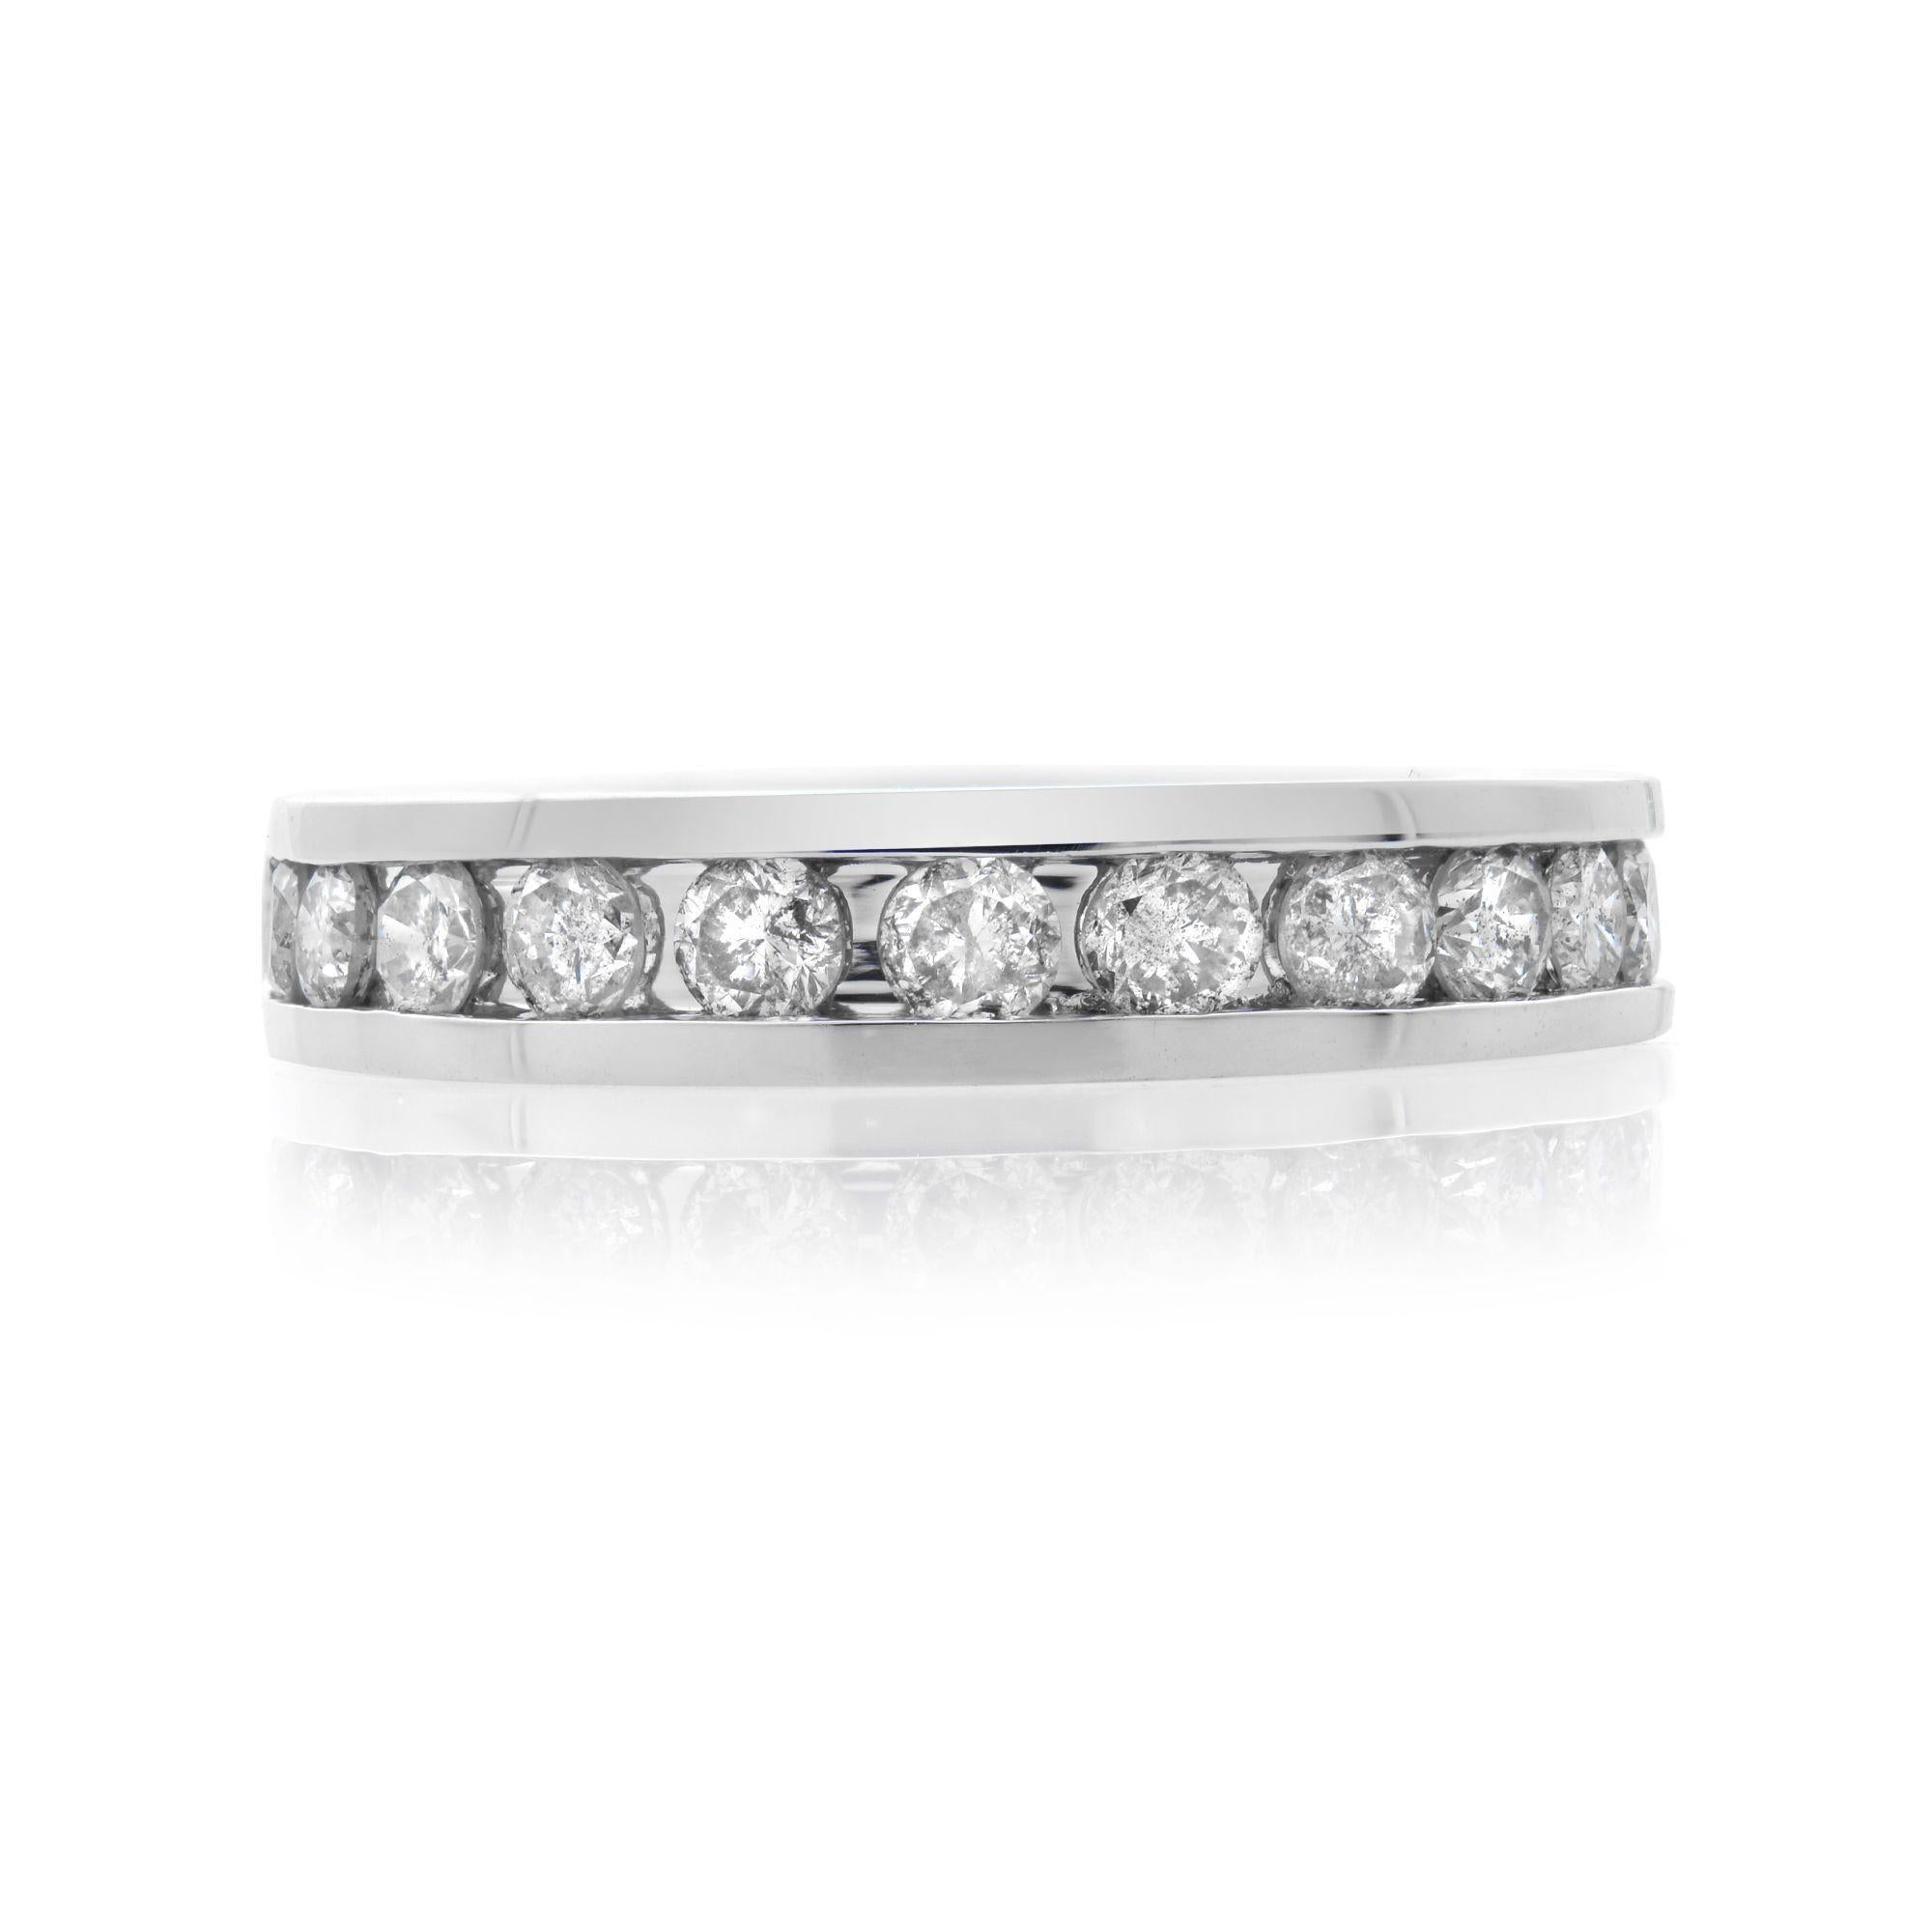 Elegant and classic diamond wedding band ring. Crafted in 14k white gold. It features a sparkling row of channel set 14 round brilliant cut diamonds weighing 1.00 carat. Diamond color G-H and SI clarity. Ring width: 4.13 mm. Ring size 6.75. Total